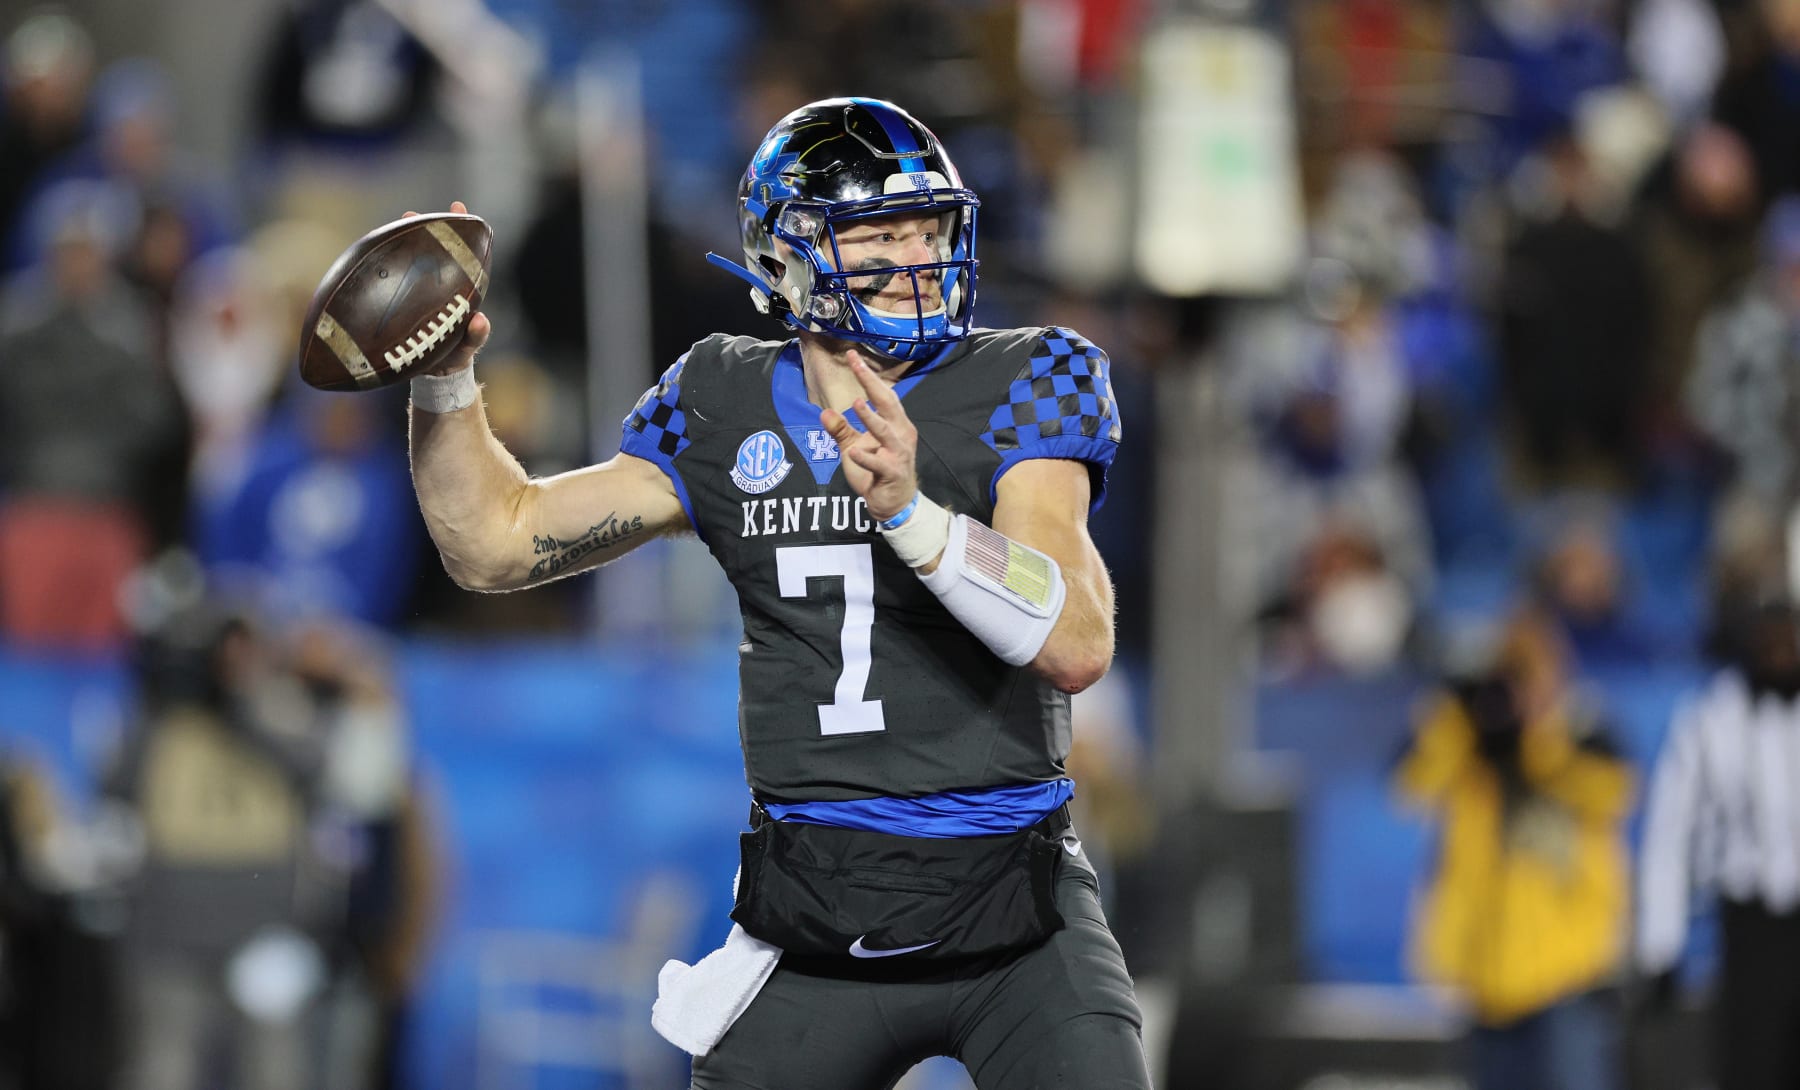 Best quarterbacks available in the 2023 NFL Draft and free agency